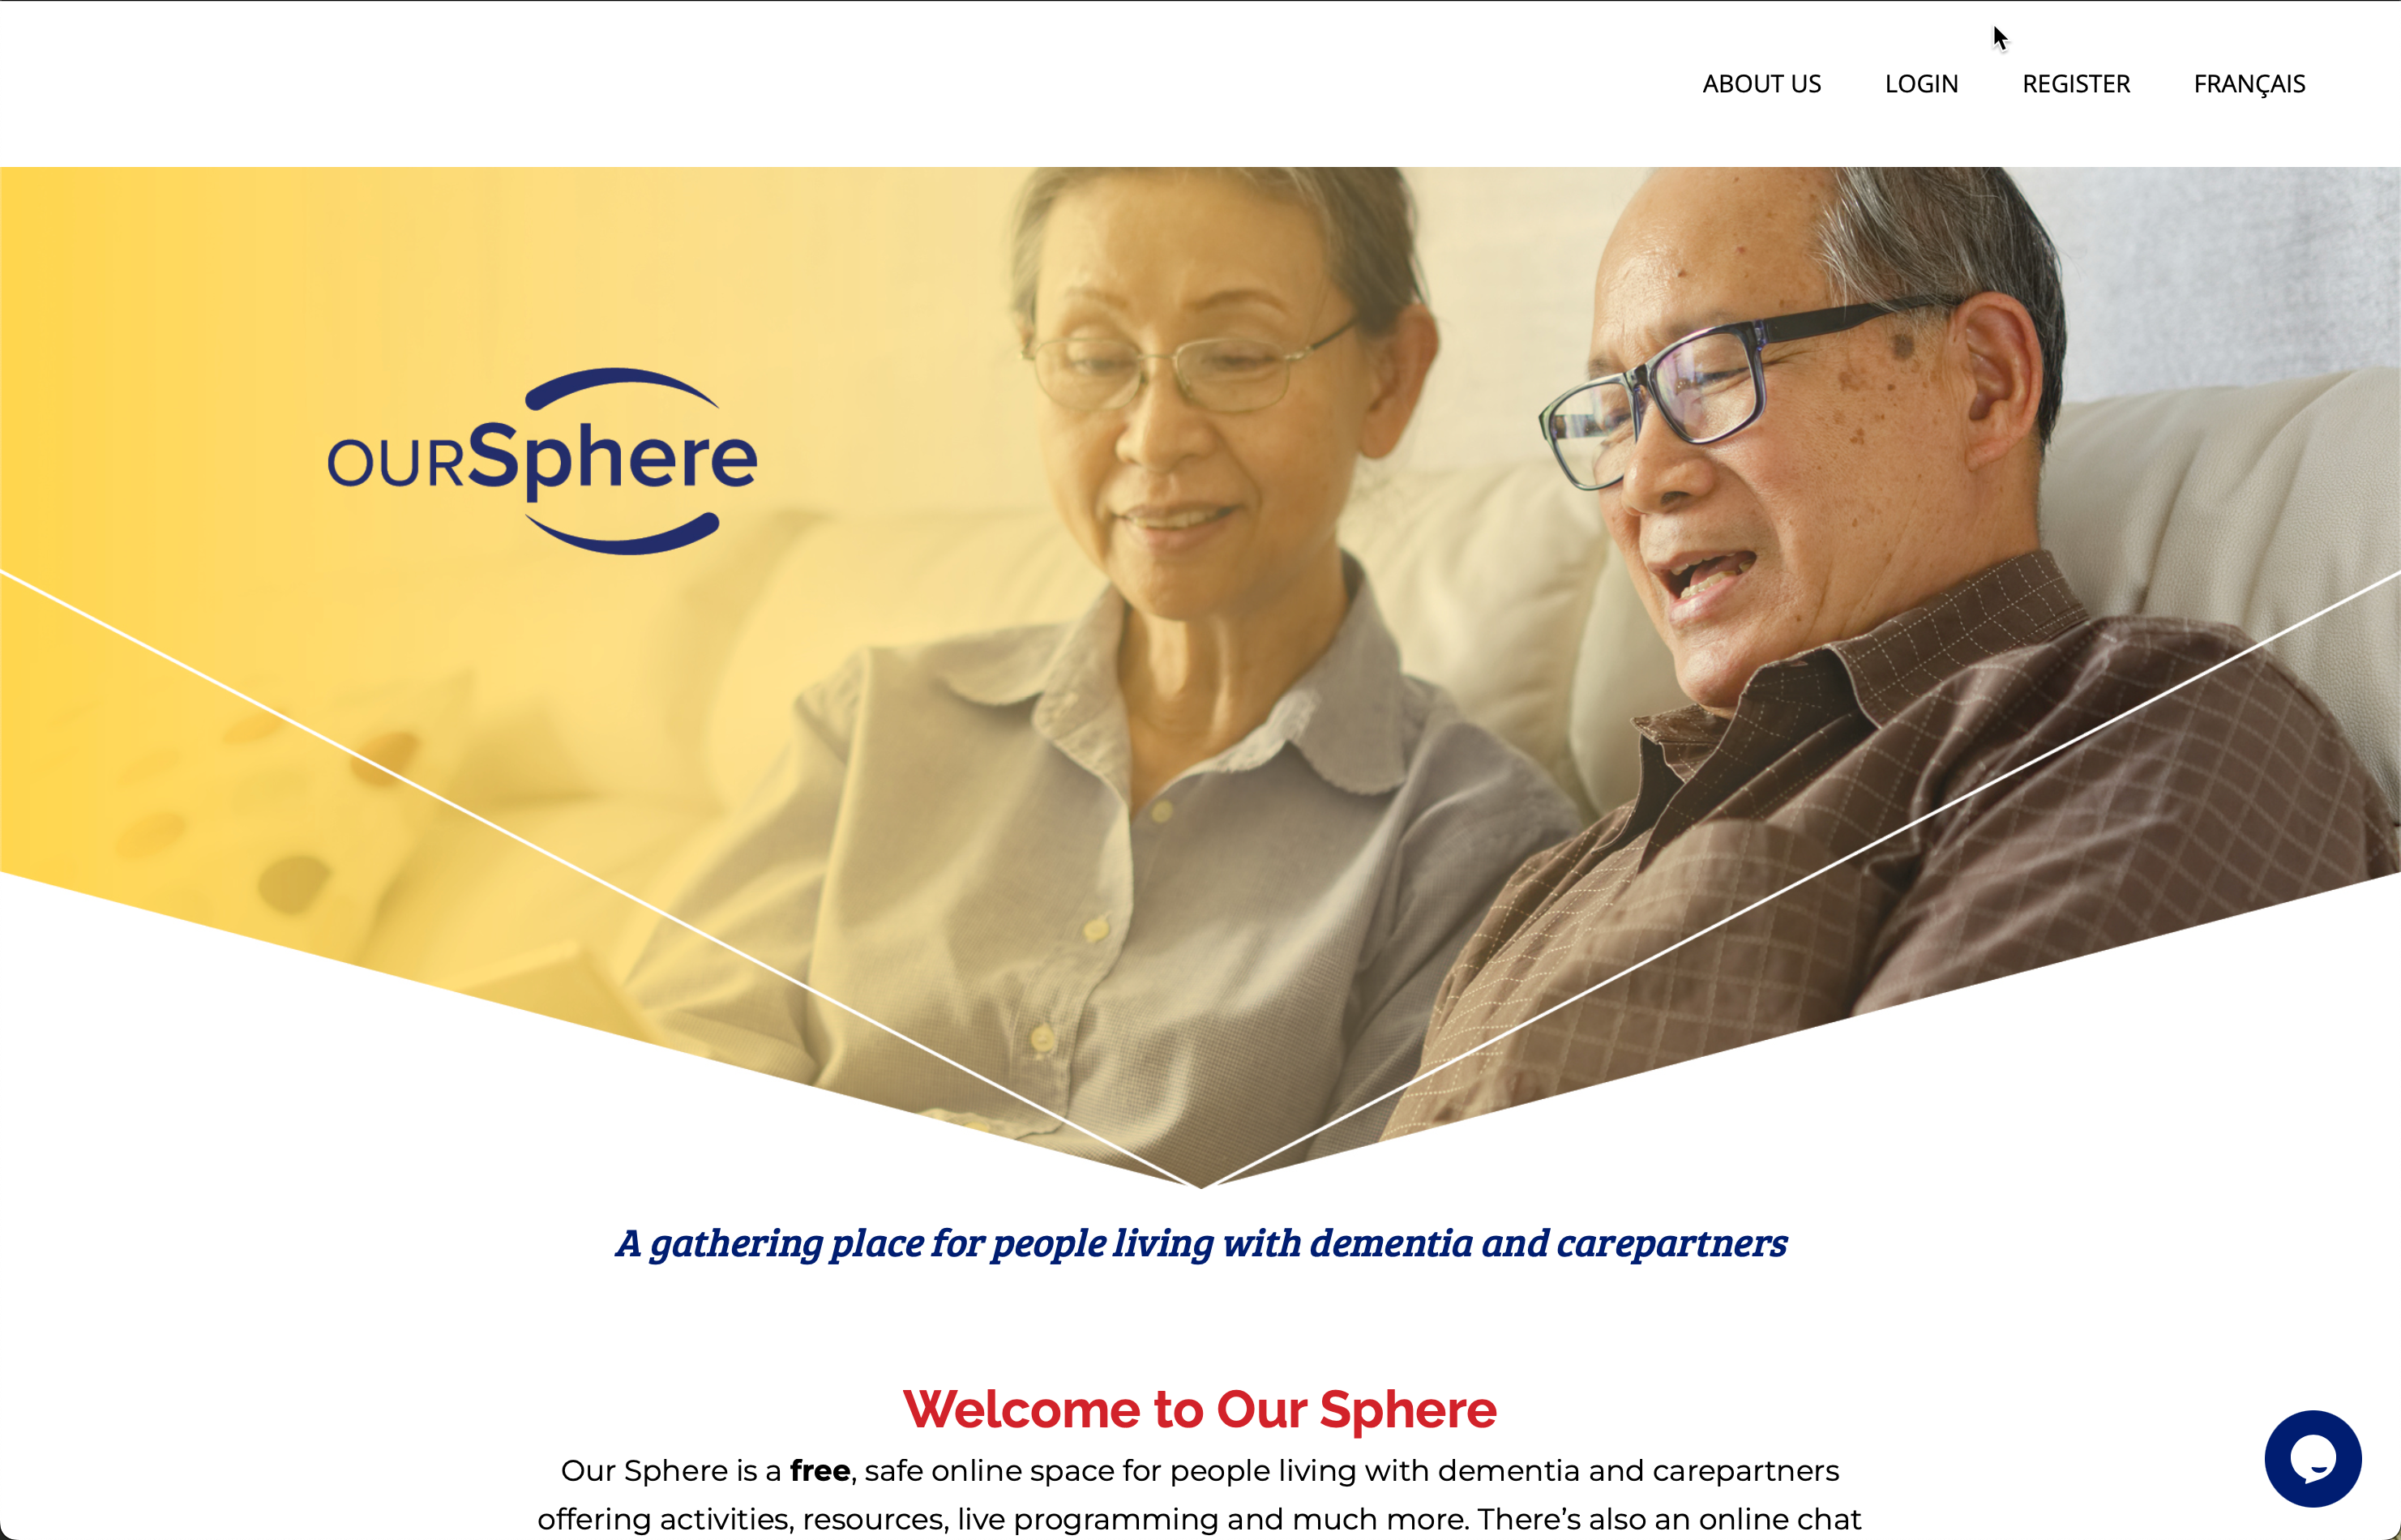 Screencapture of the home page of Our Sphere